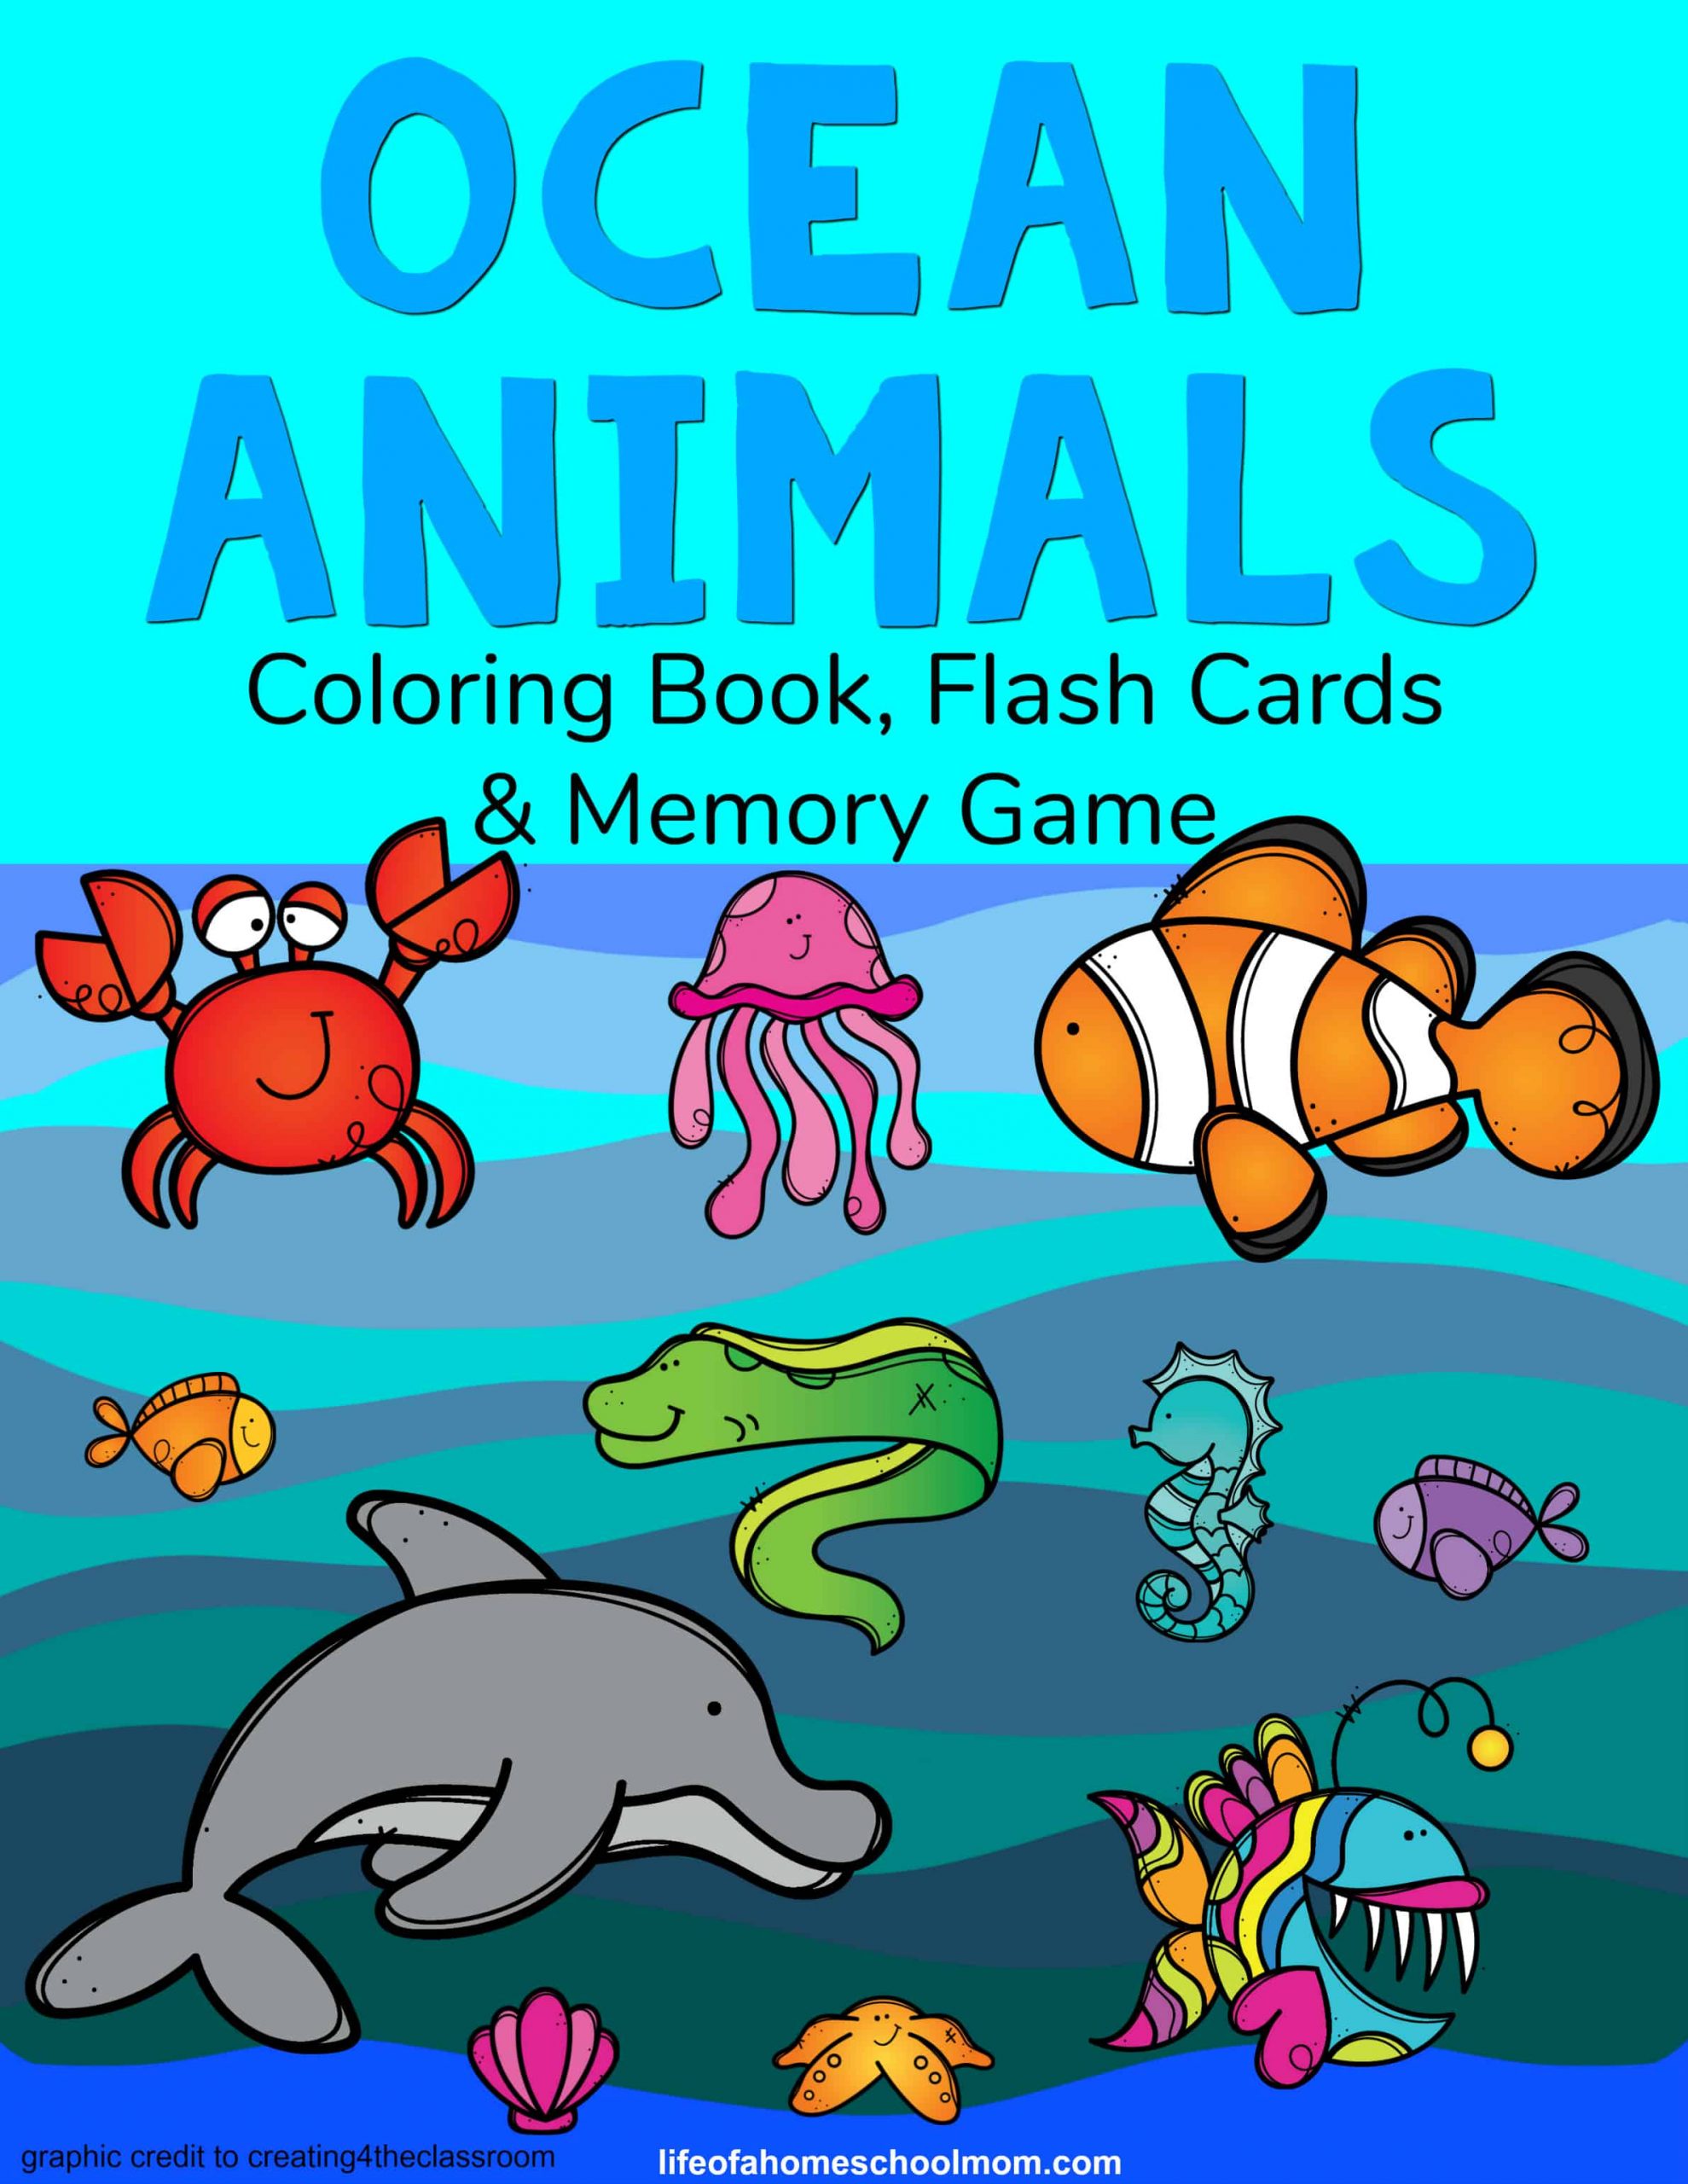 Ocean animals coloring pages and activity book